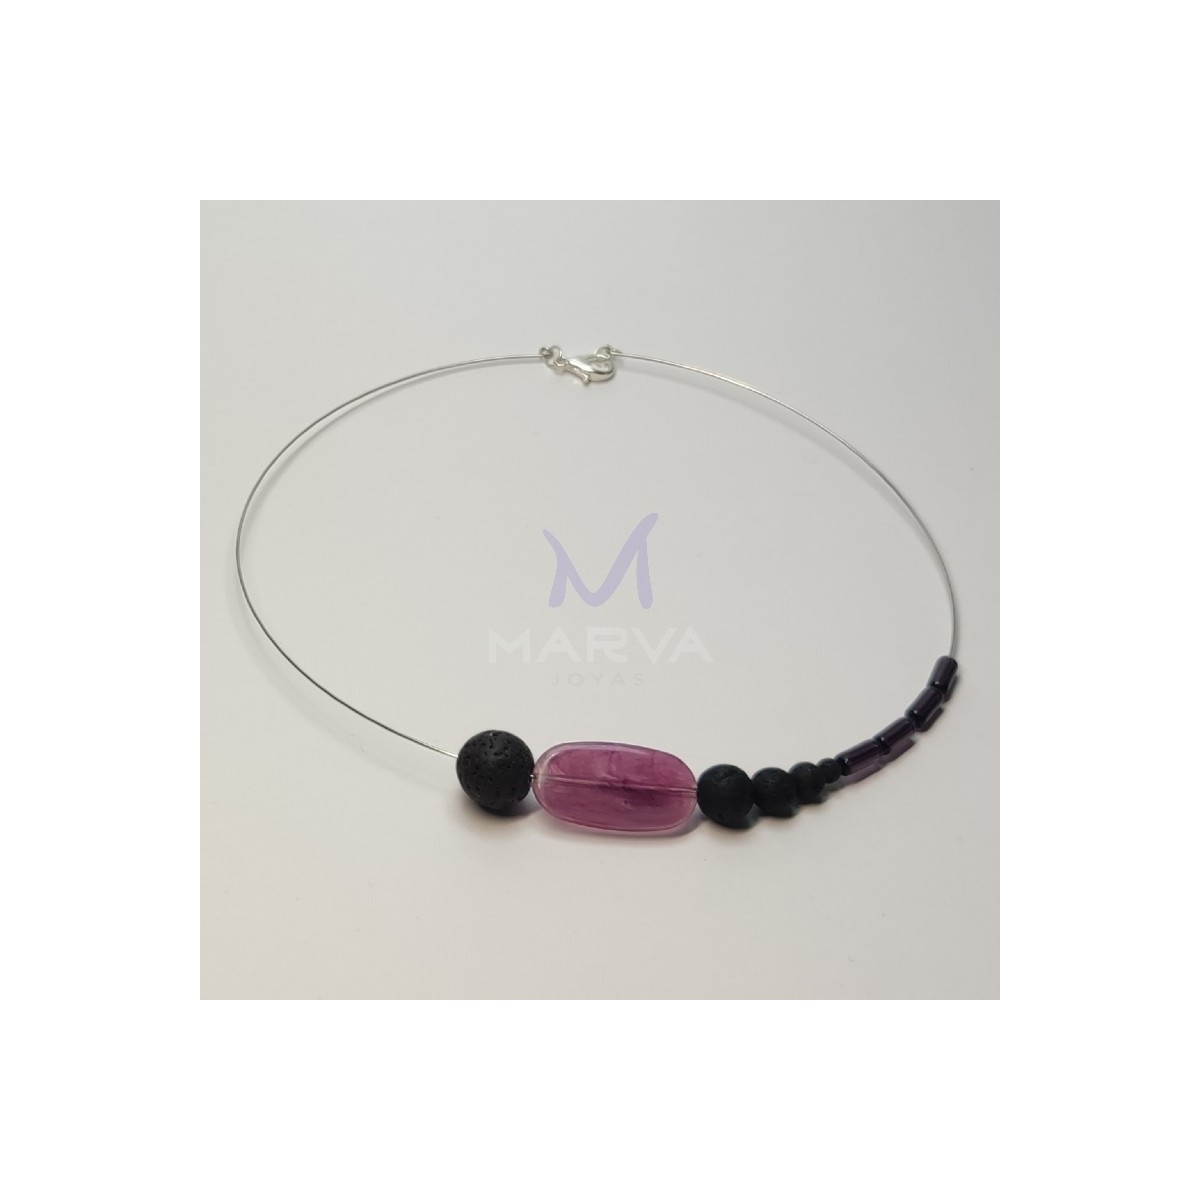 MALOW necklace